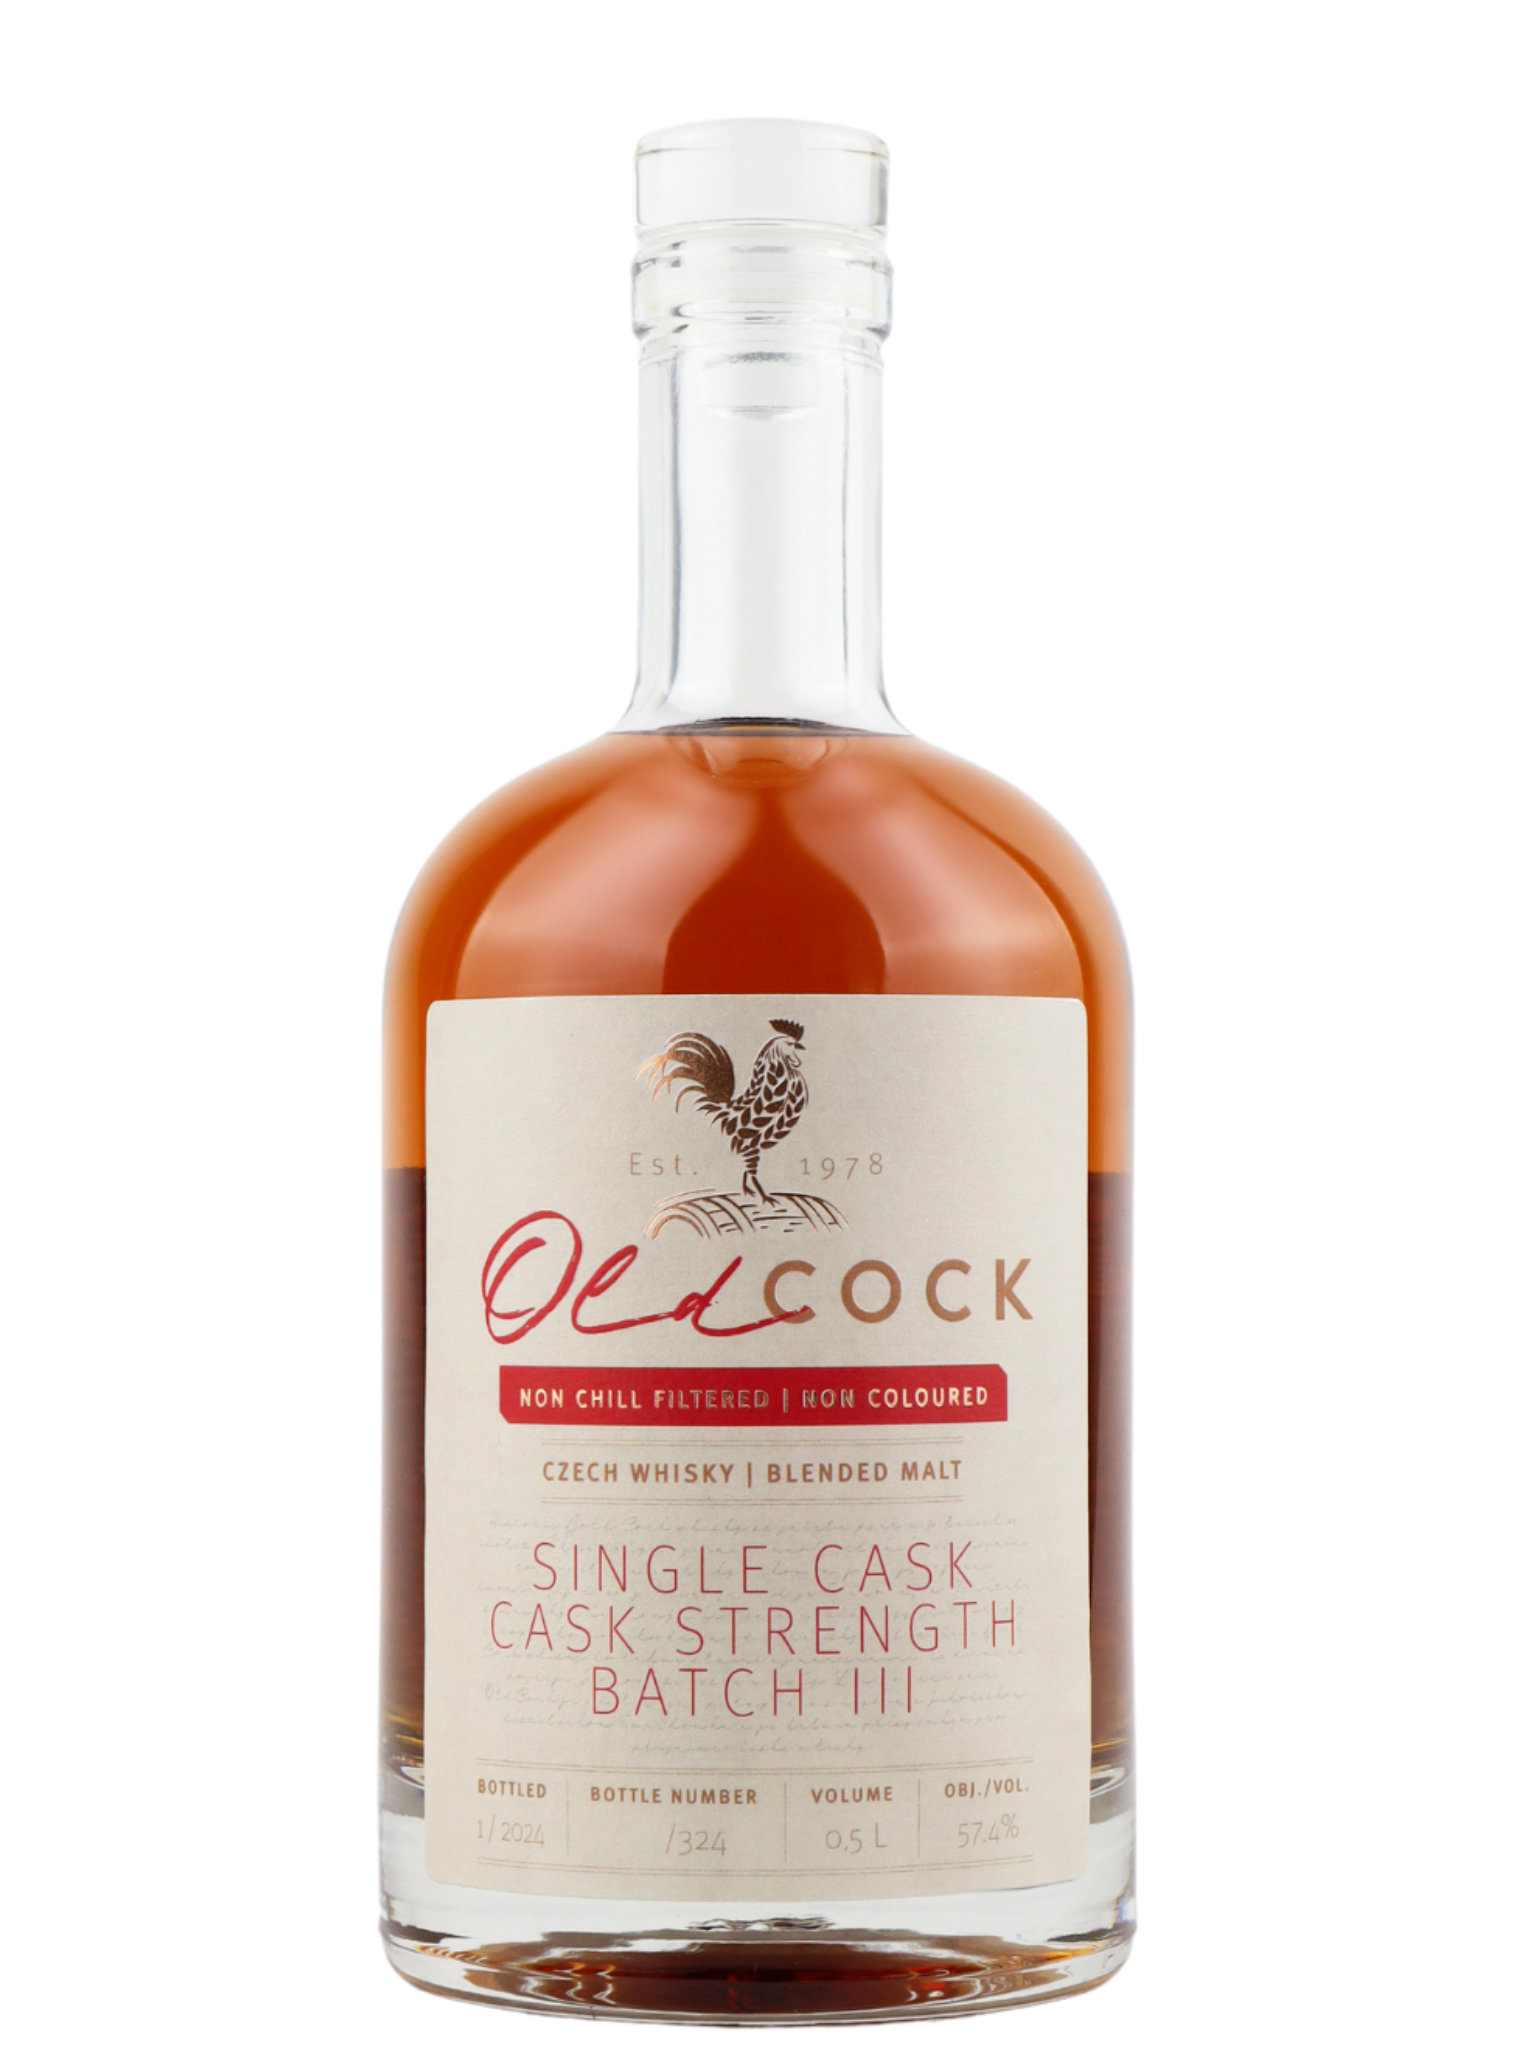 GOLDCOCK Whisky OldCOCK Batch III 57,4% 0,5l